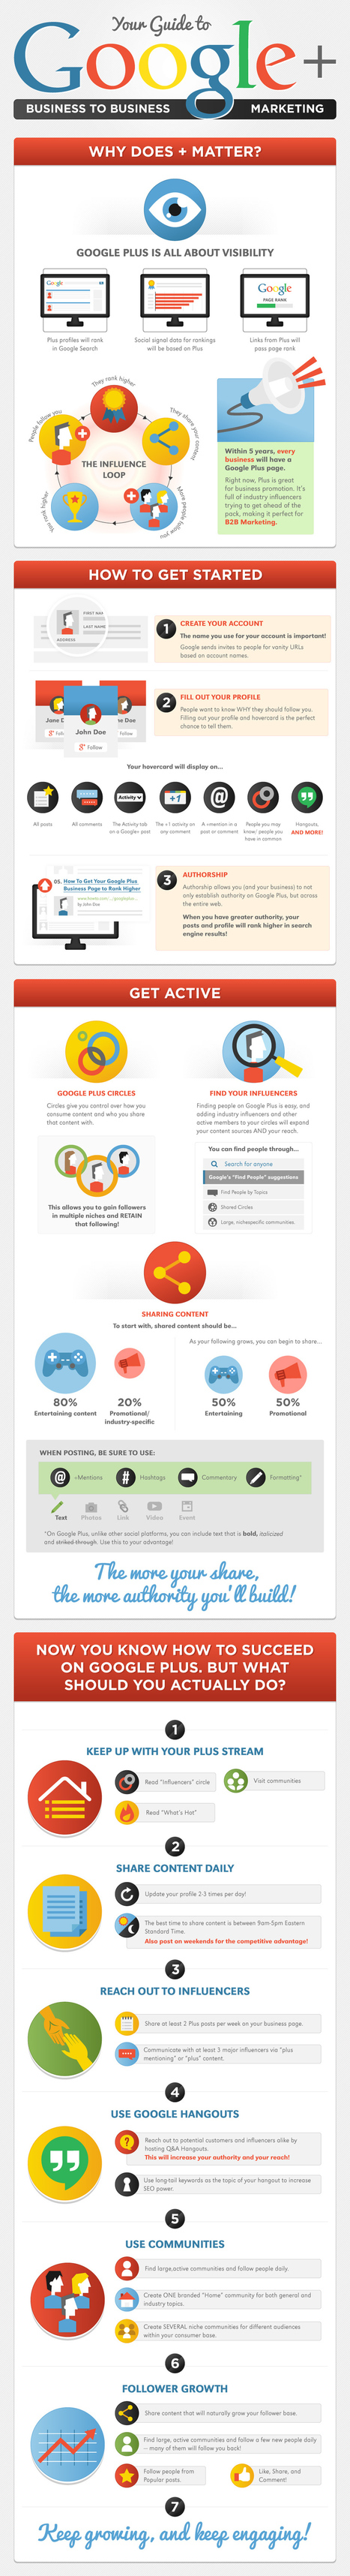 The Complete Guide to Google+ for B2B Marketing [Infographic] | Professional Learning Promotion & Engagement | Scoop.it